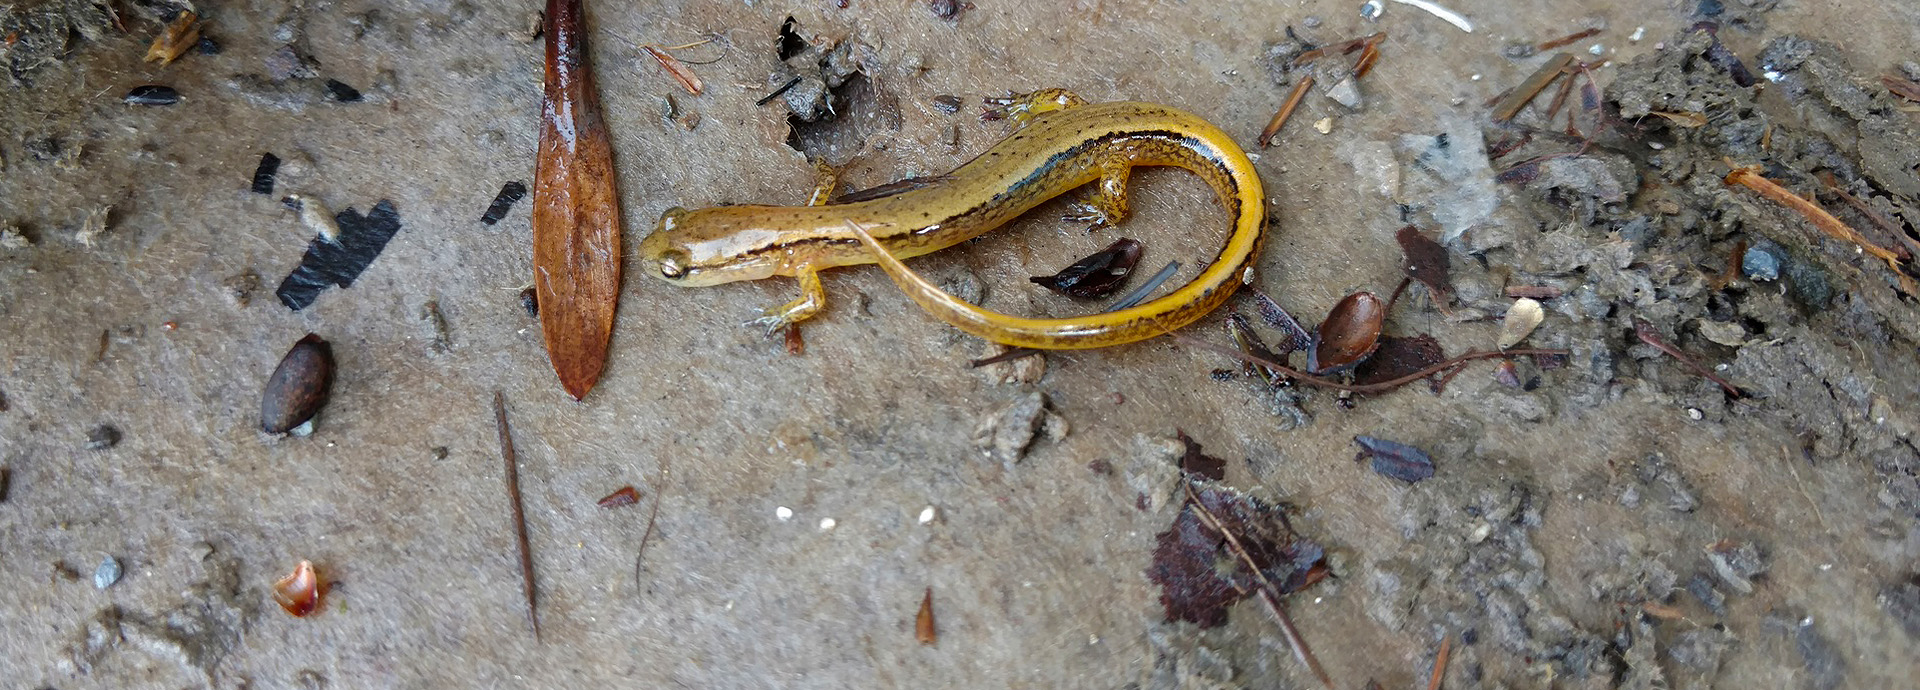 Slideshow Image - A small Red-Backed Salamander near a riverbed